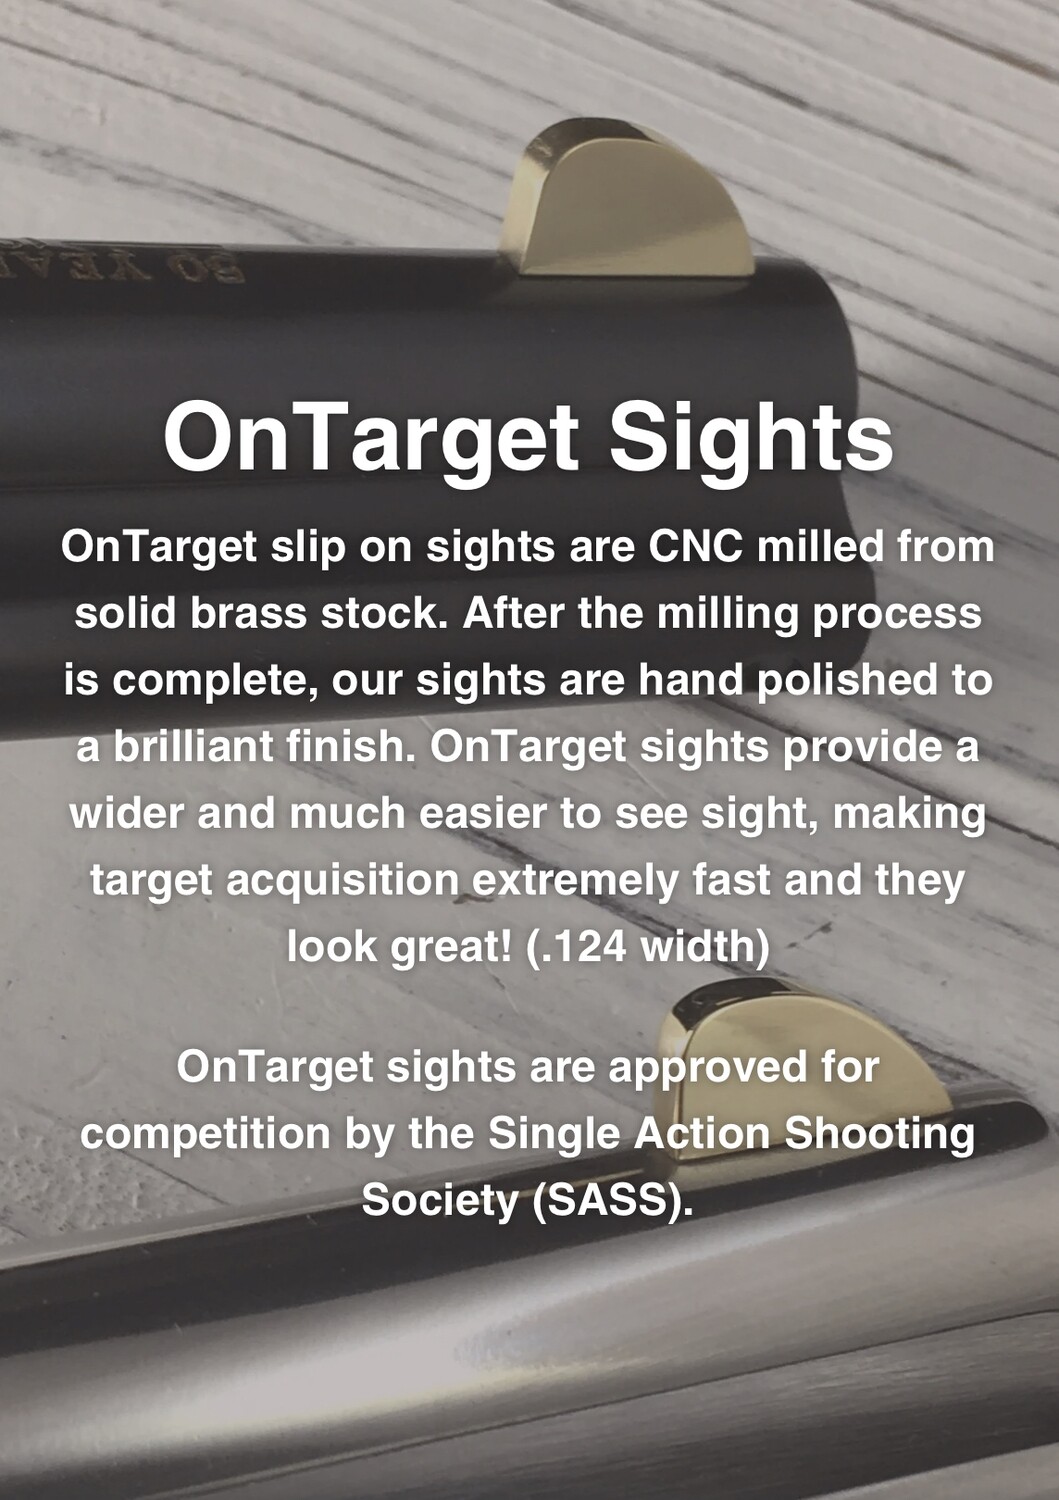 On Target Sights PAIR - Click Button